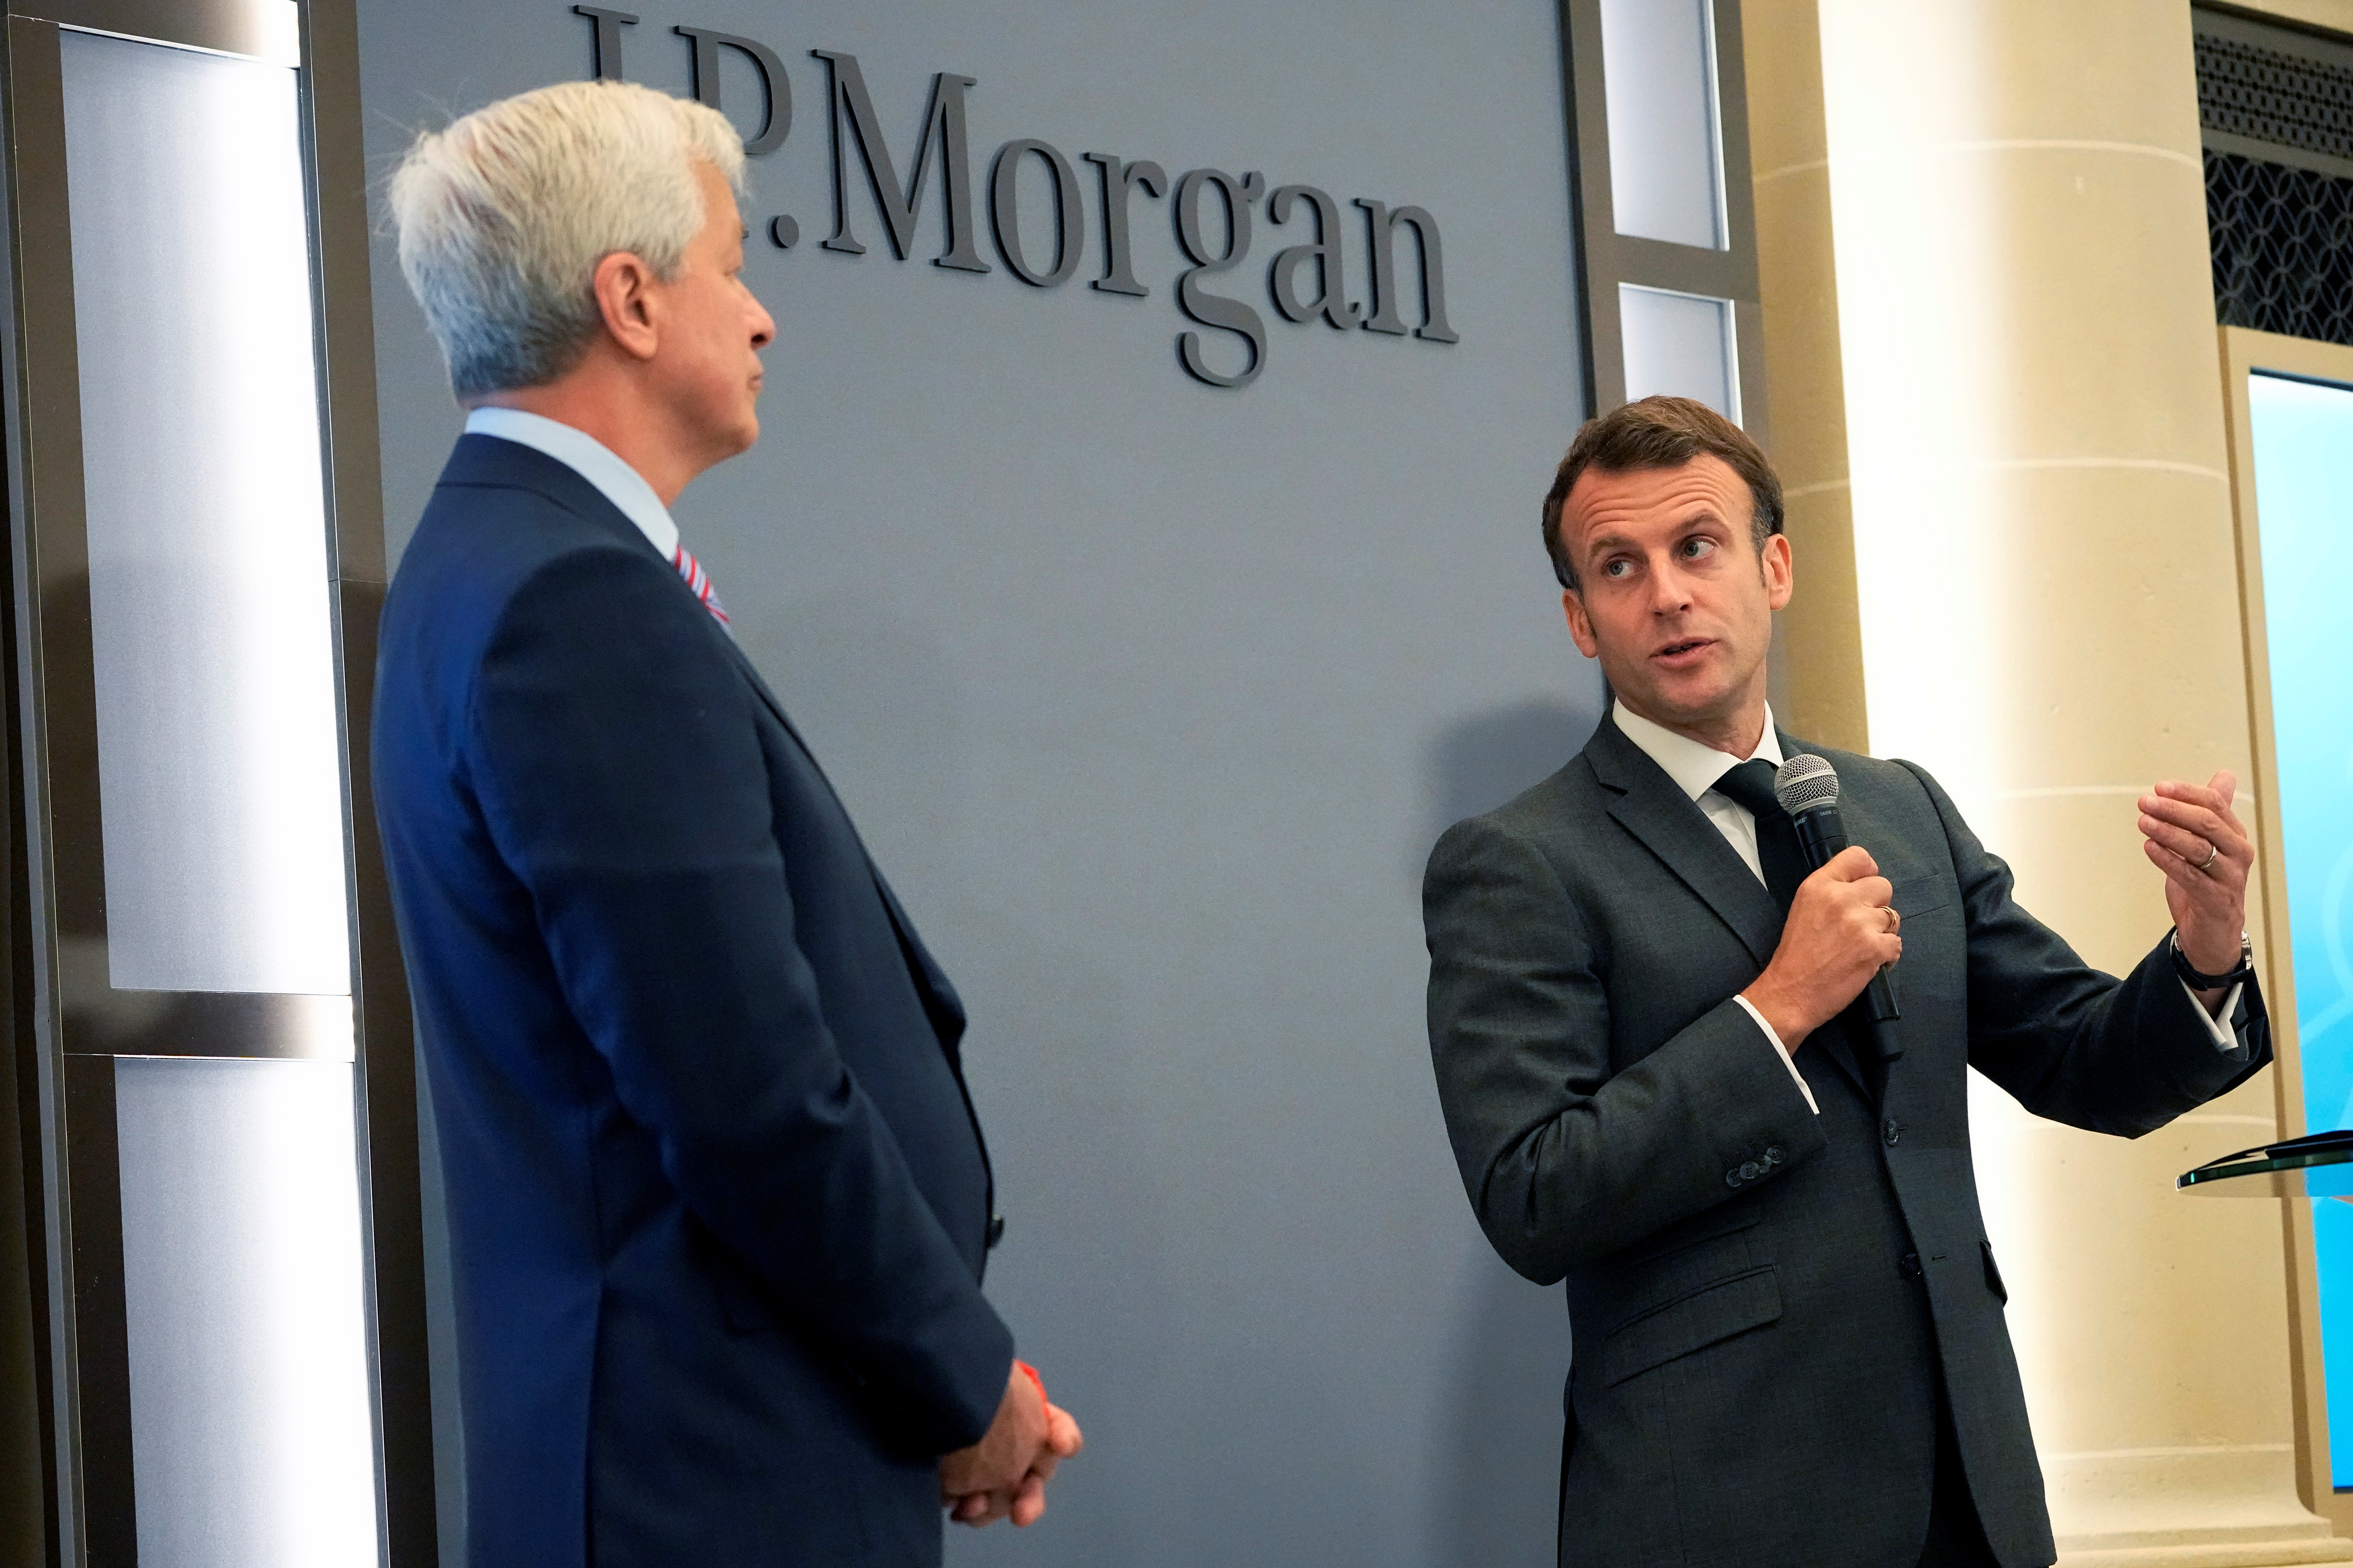 JP Morgan CEO Jamie Dimon listens to French President Emmanuel Macron as they inaugurate the new French headquarters of JP Morgan bank in Paris